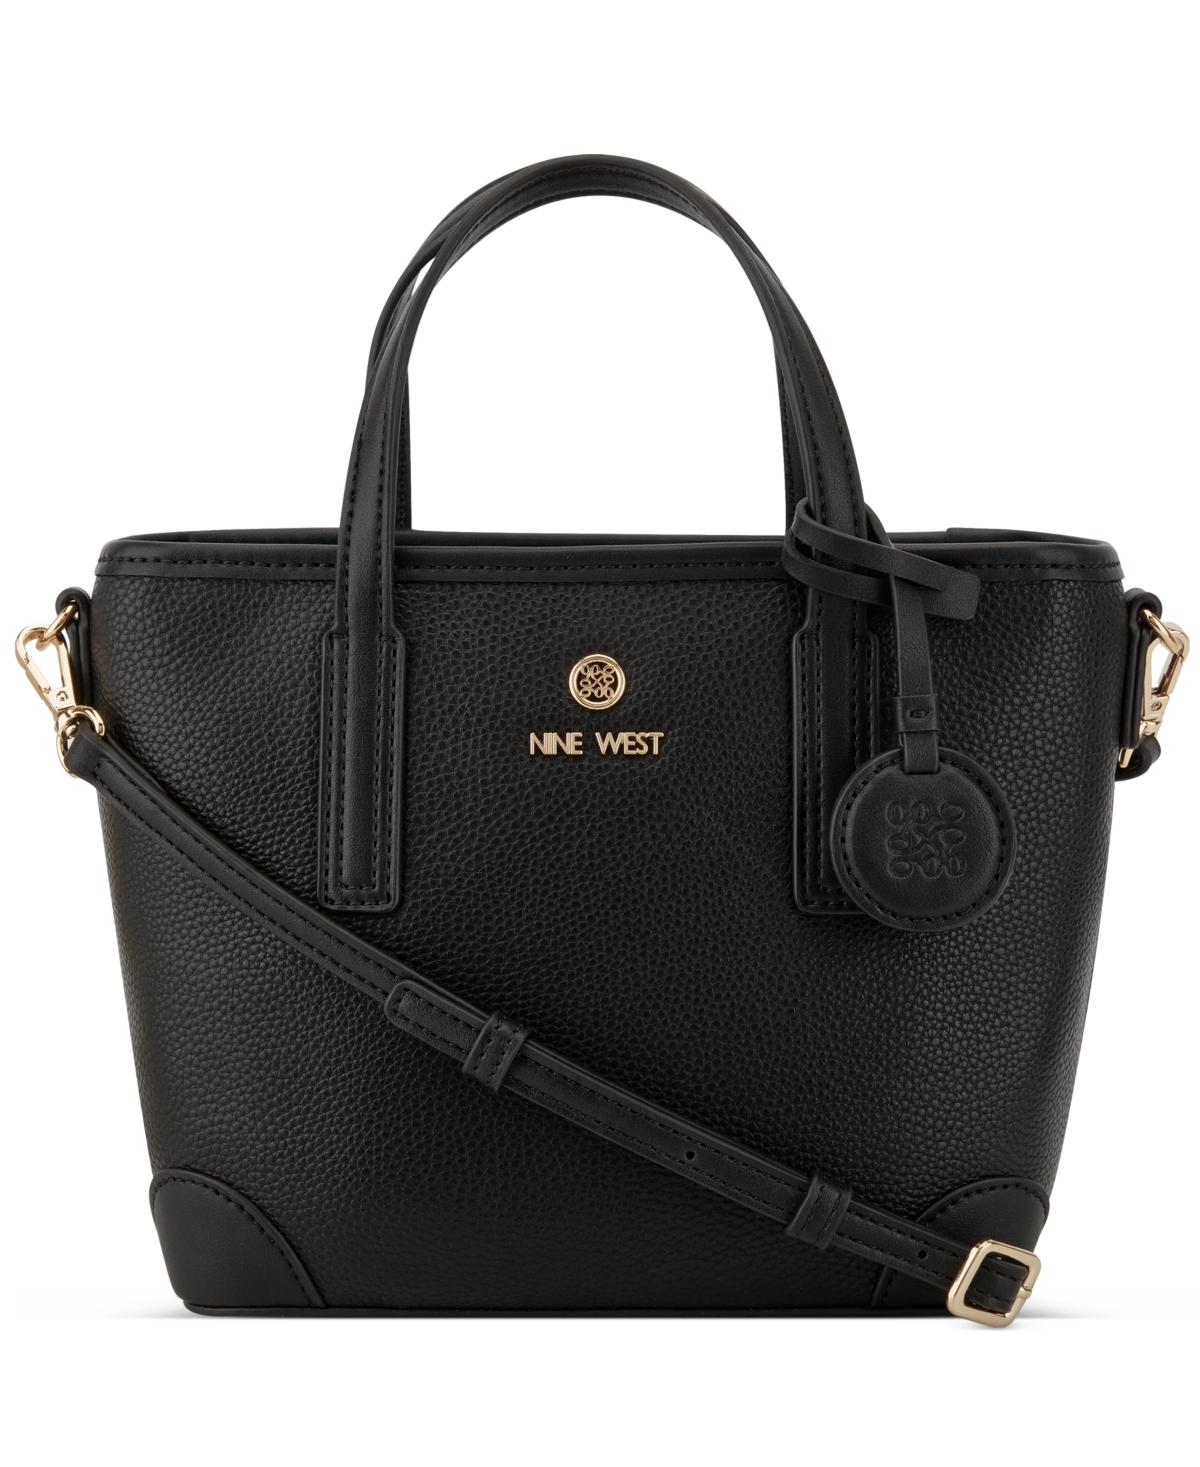 Nine West Delaine Small Tote In Black